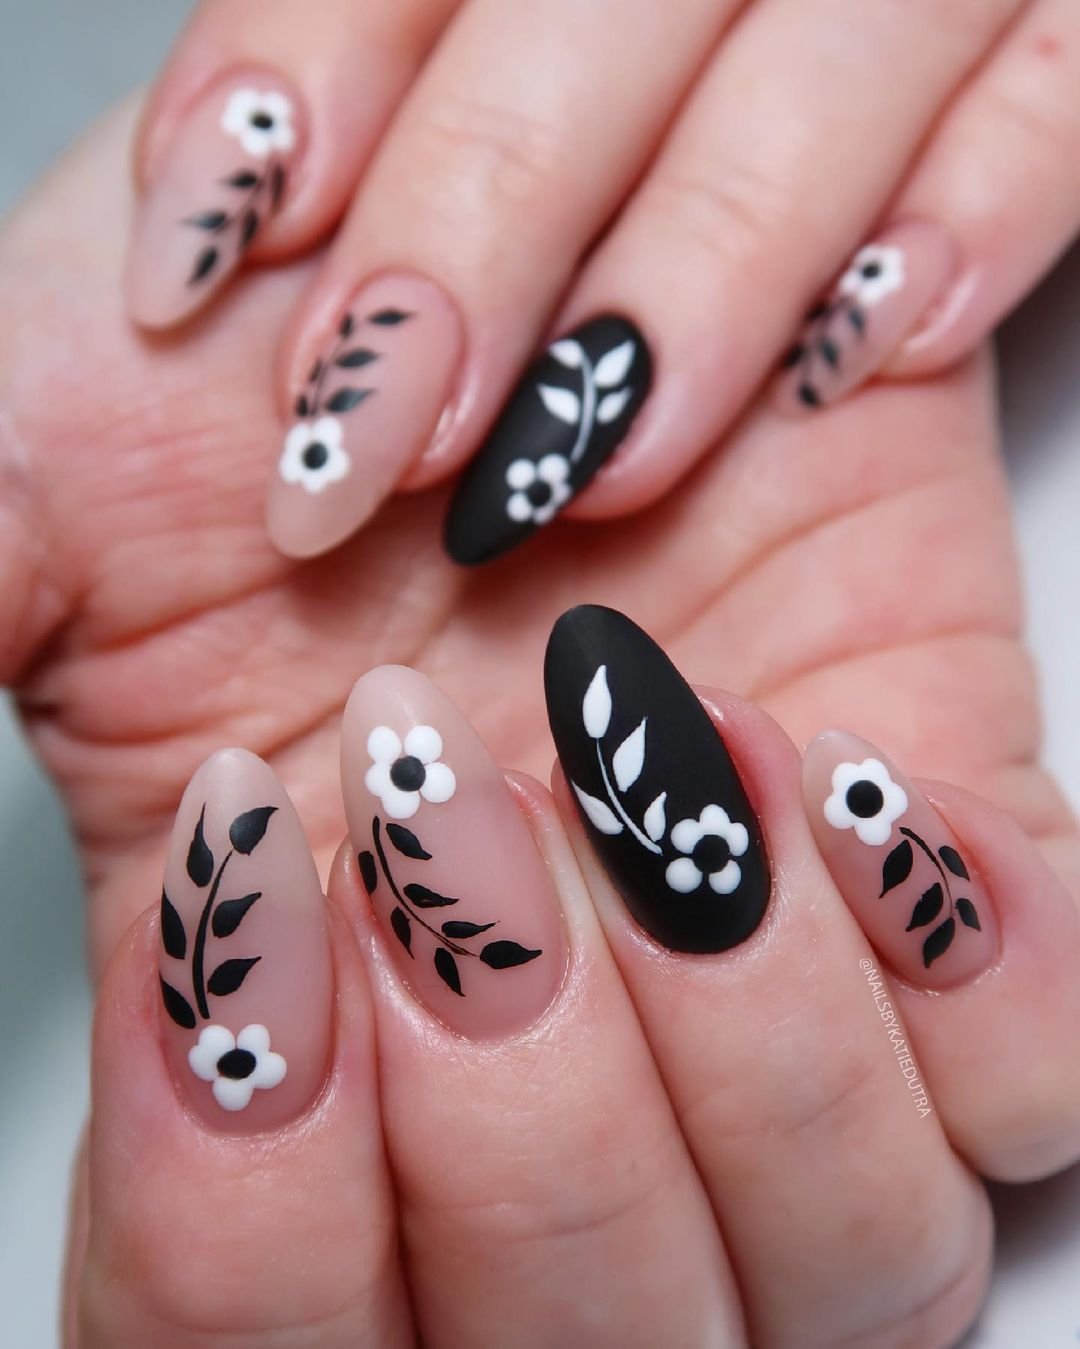 5 - Picture of Black and White Nails